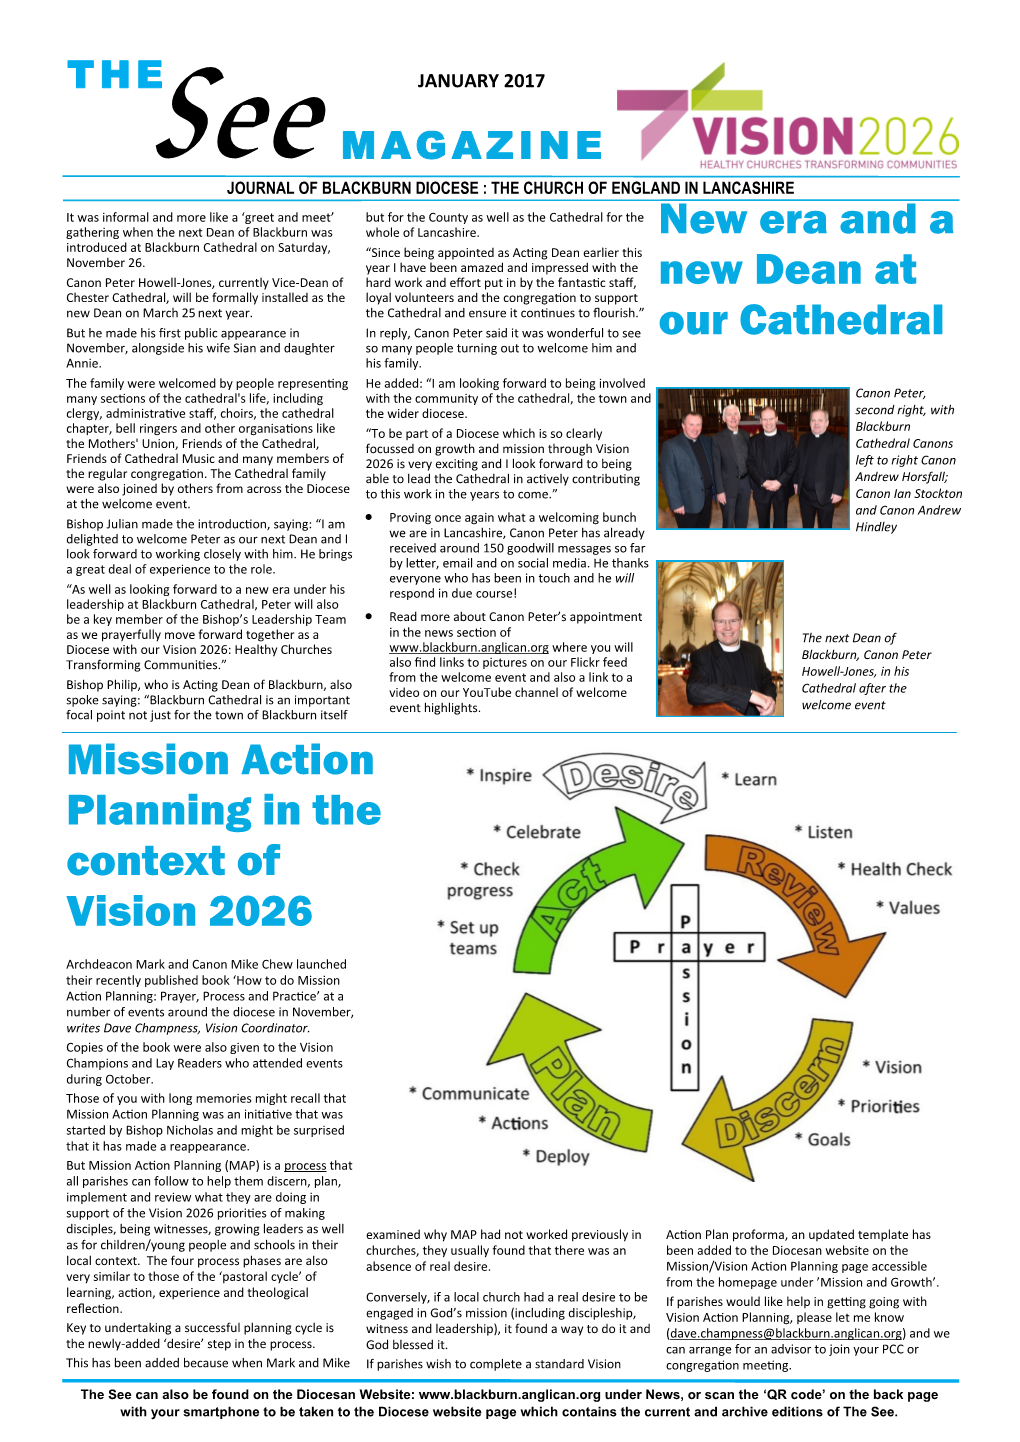 New Era and a New Dean at Our Cathedral Mission Action Planning